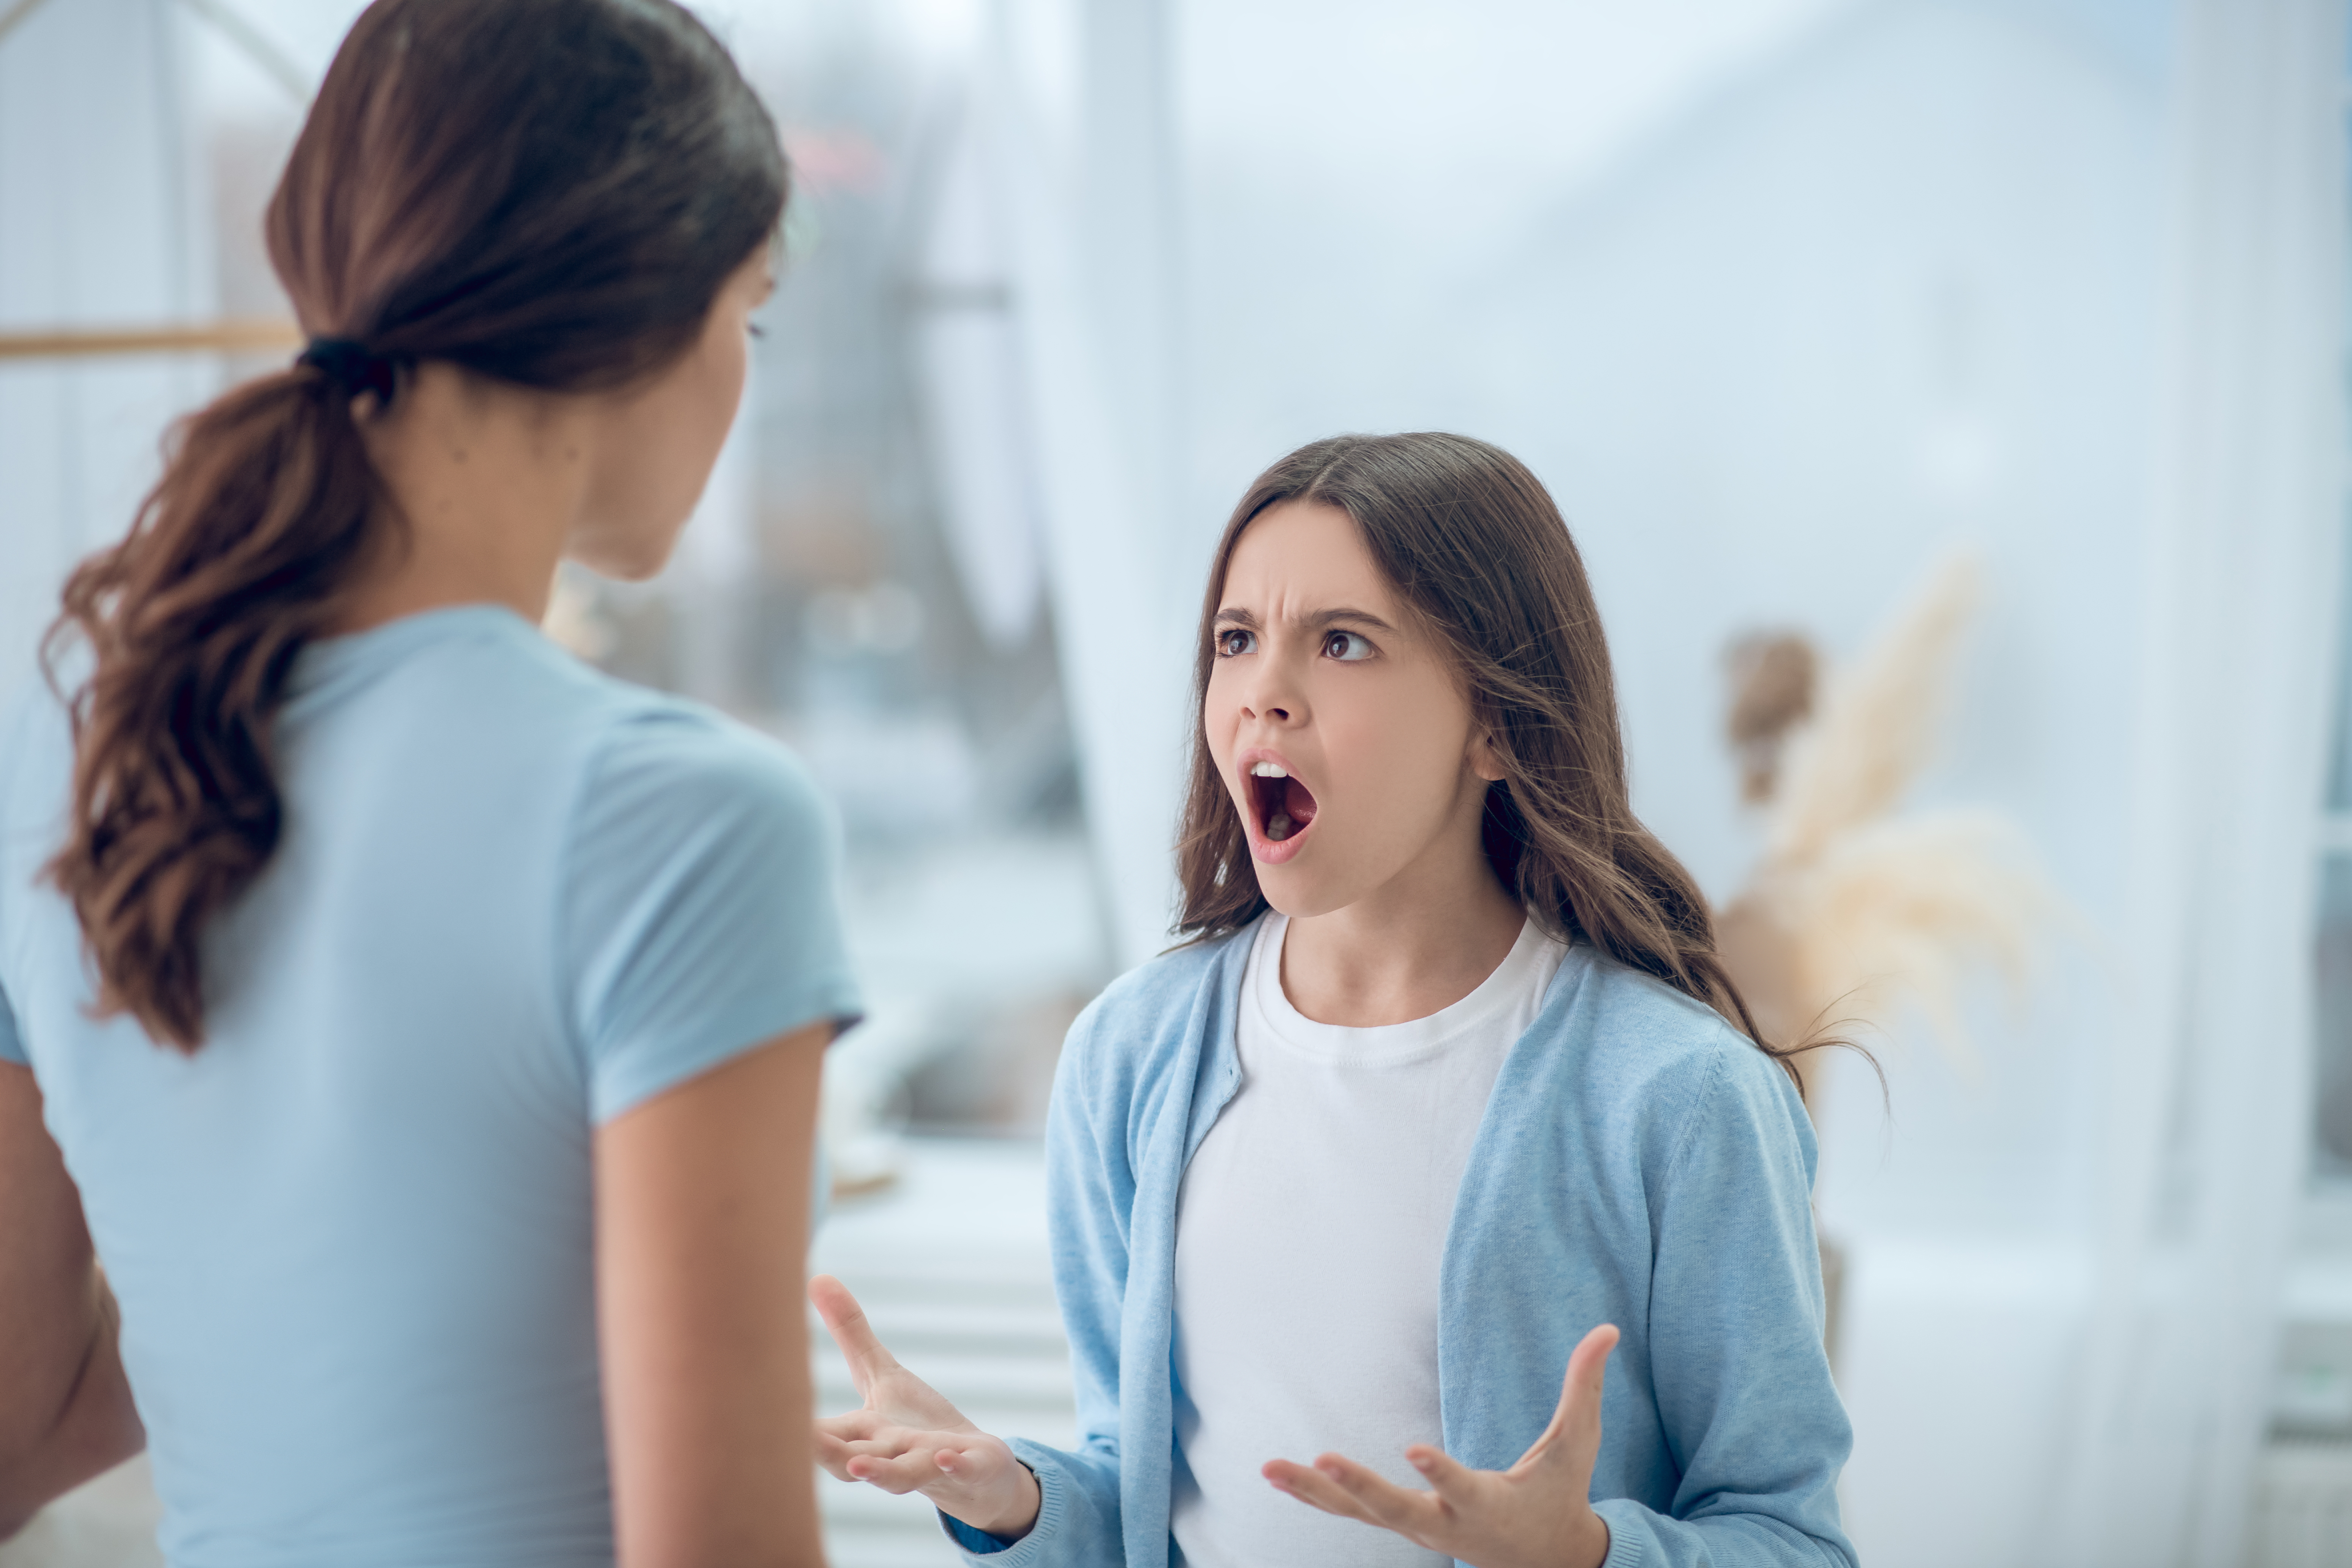 A teenage girl is seen screaming at the woman standing in front of her | Source: Shutterstock